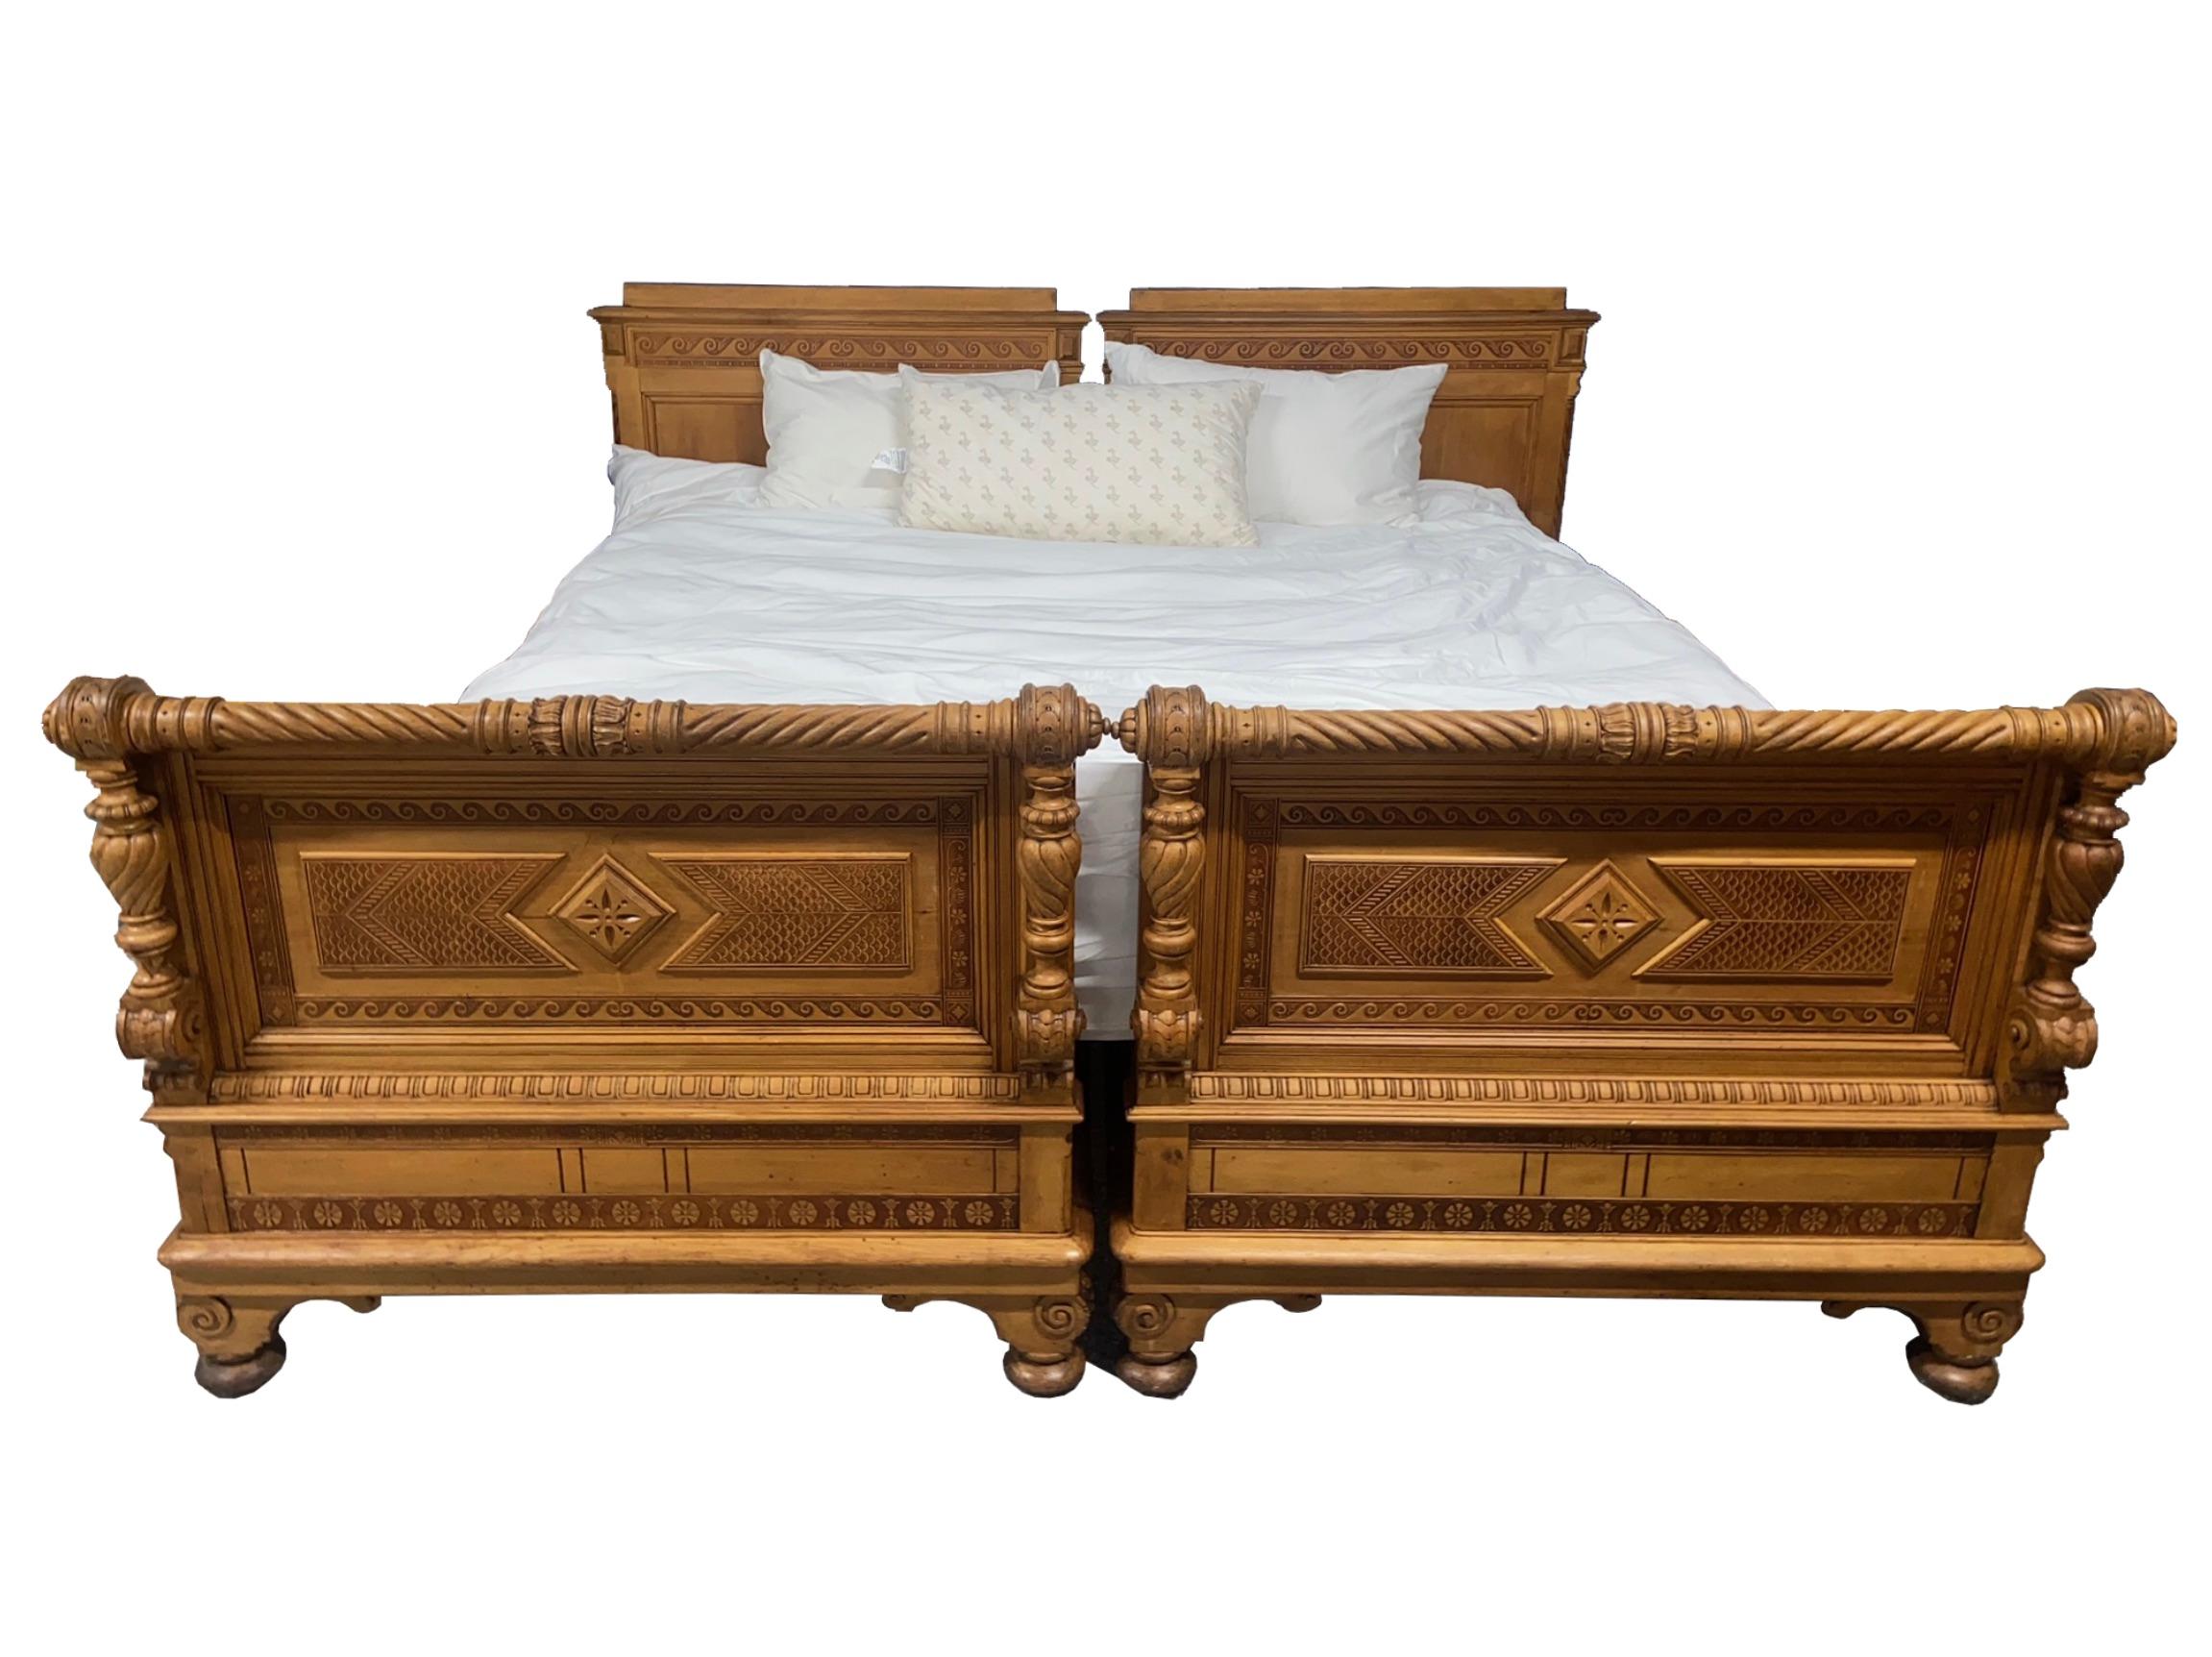 47.5″H x 88″D x 91.5″W

A striking and elaborately carded pair of vintage Austrian bed may just suit a snowy mountain retreat. Now reconfigured for a custom king mattress, these beds can pair with matching side tables and an amour which all belonged